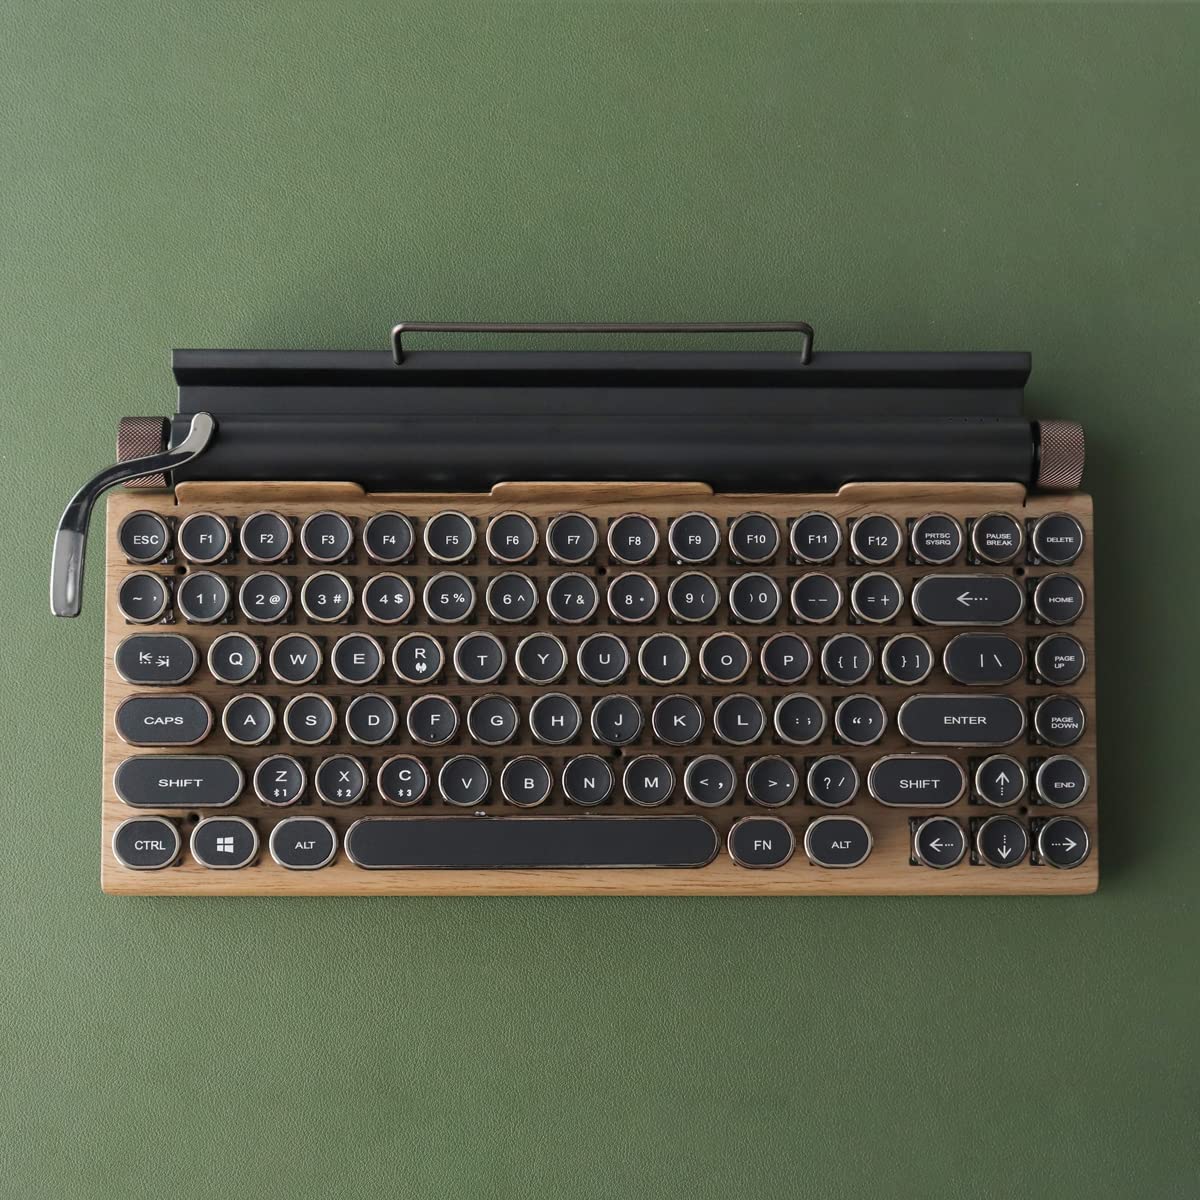 Retro Typewriter Keyboard for Quality Inspection